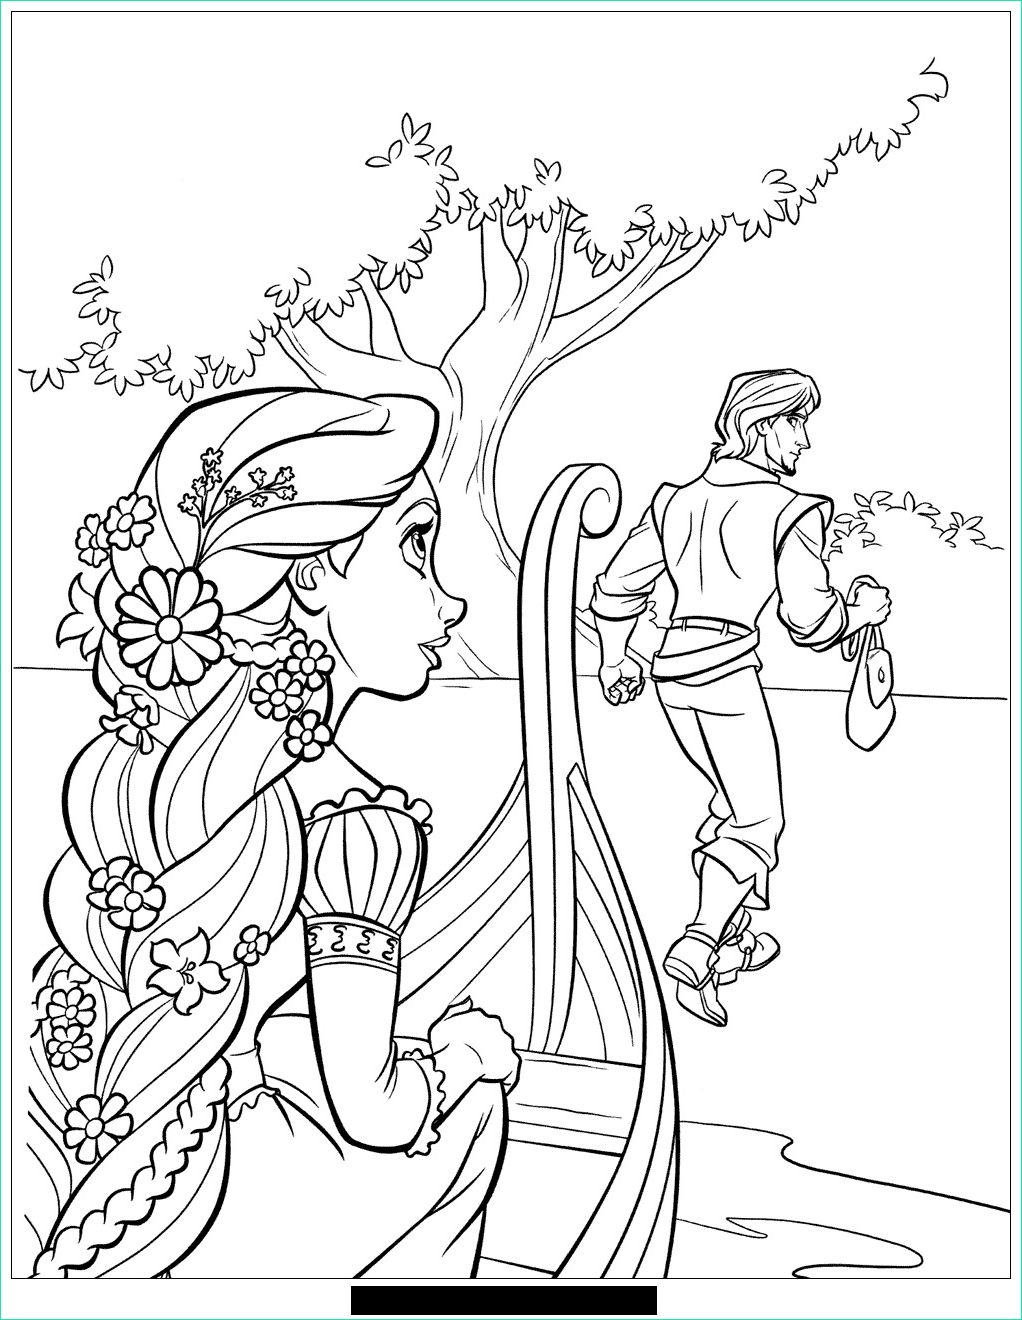 image=tangled Coloring for kids tangled 3